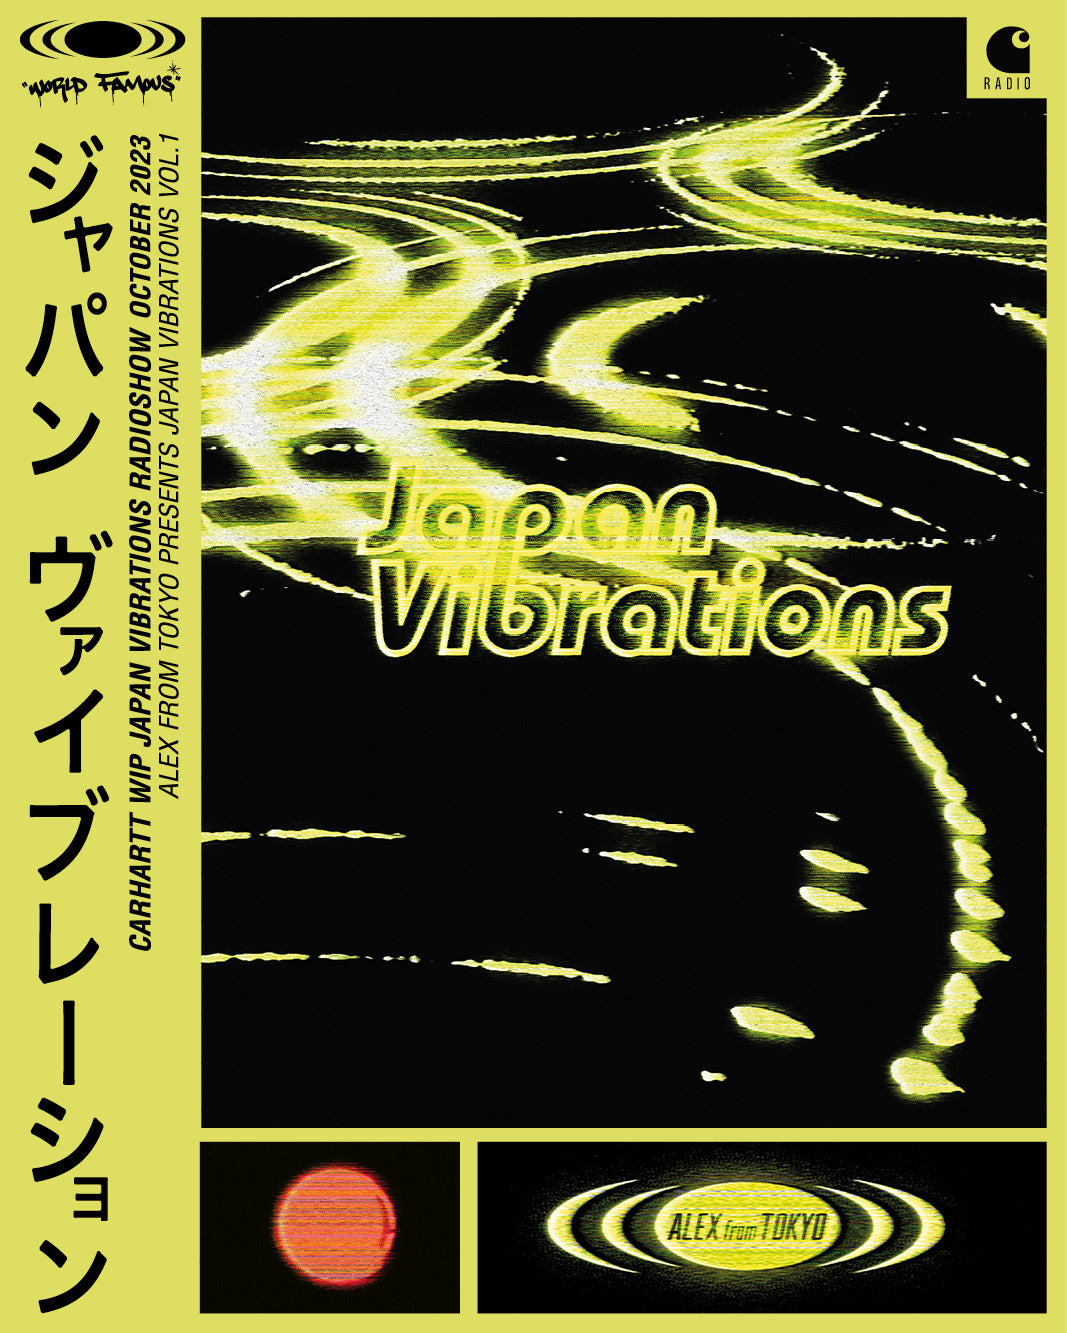 Japan Vibrations and Carhartt WIP collaboration Radio Show poster with Alex from Tokyo